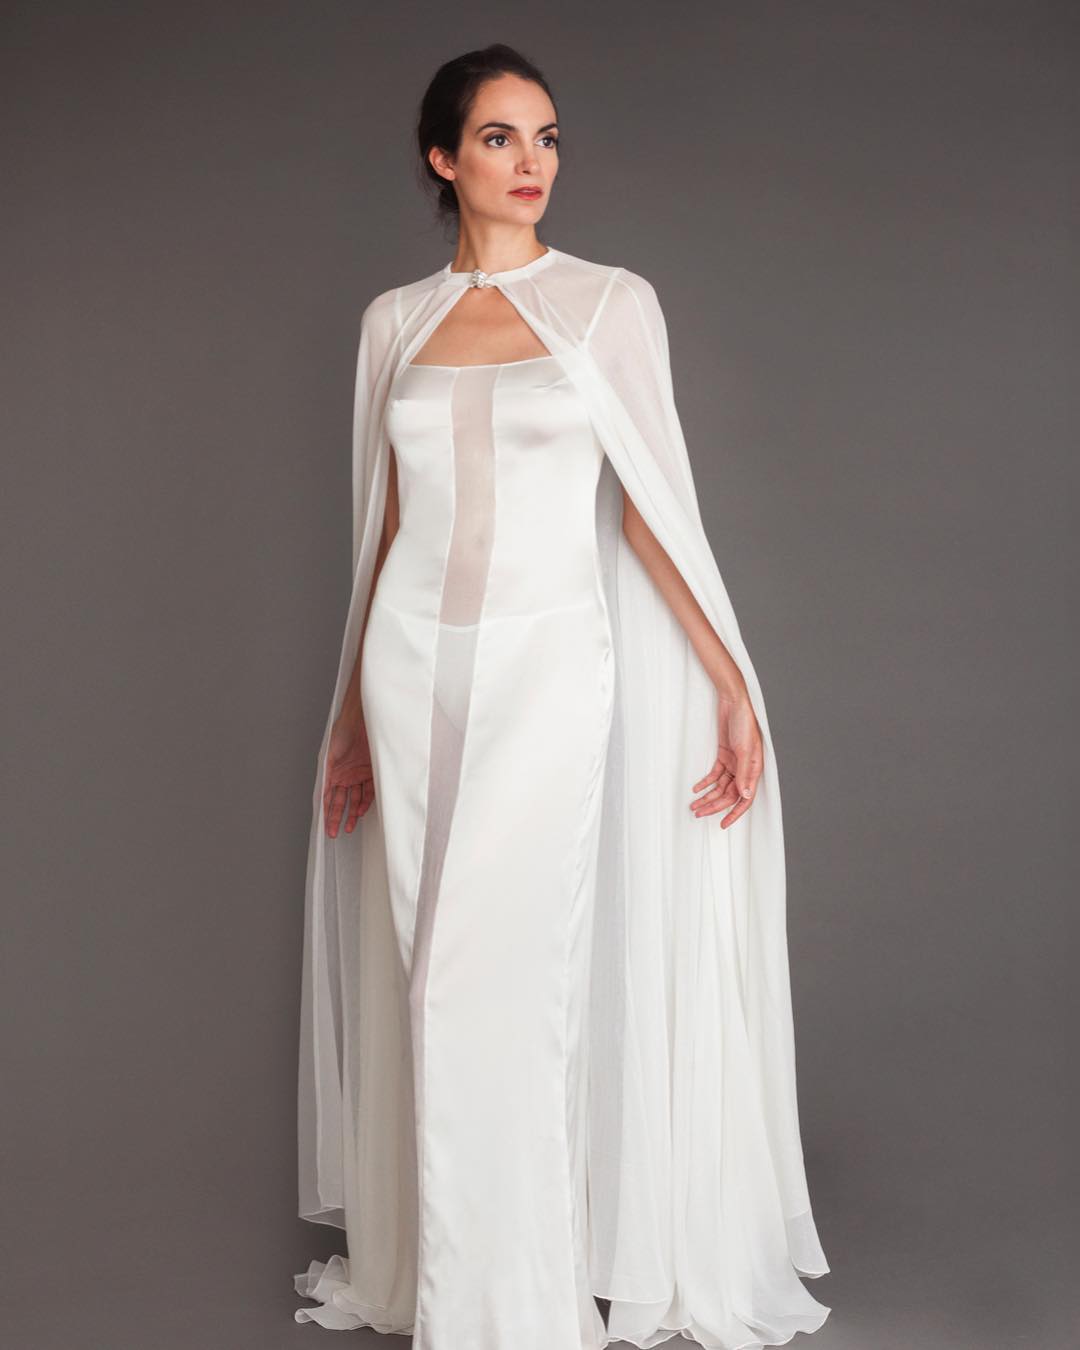 Wedding capes is a new 2020 bridal trend